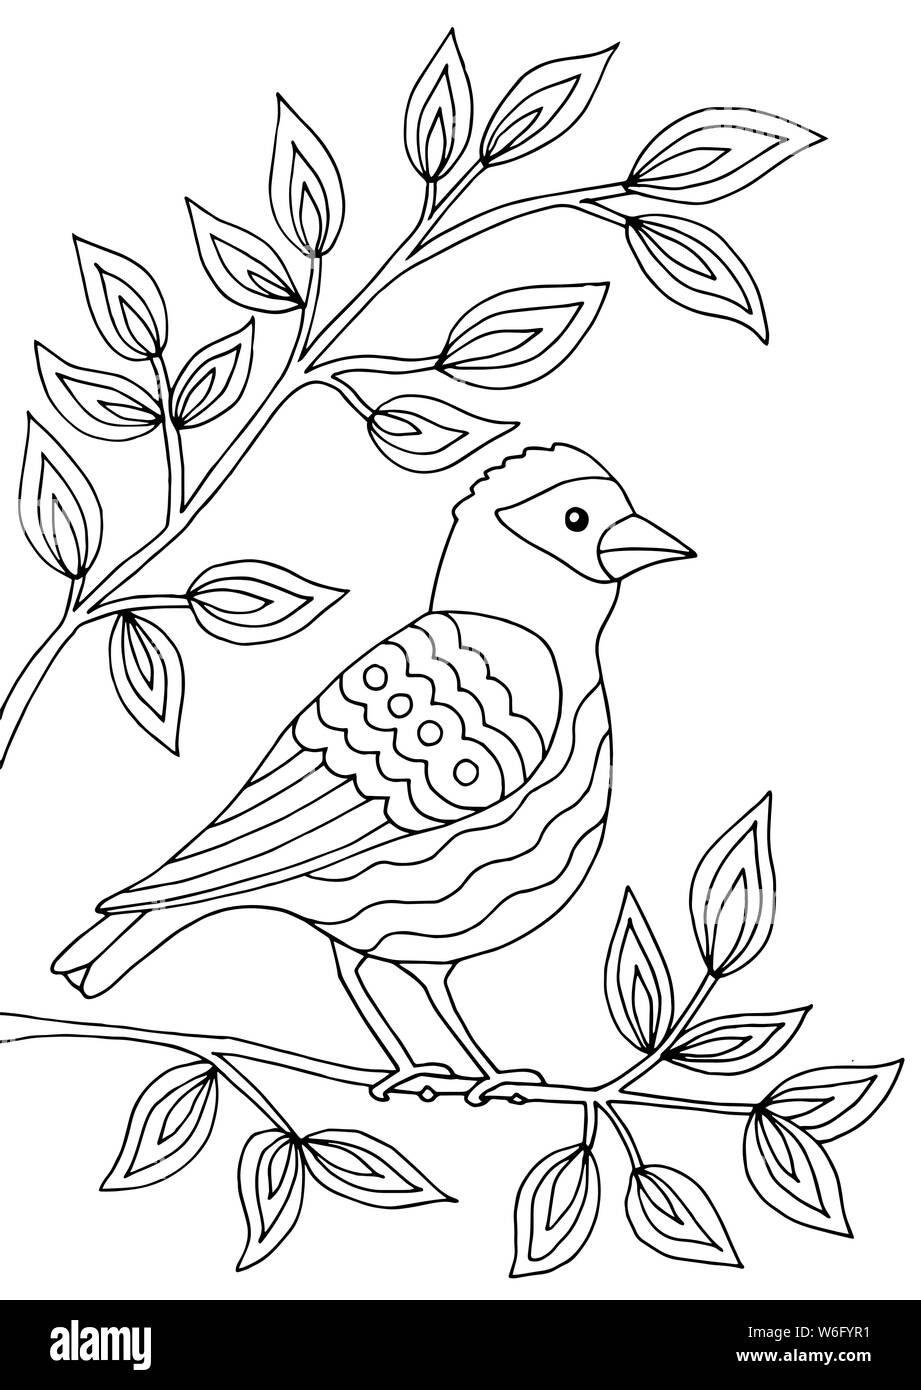 Bird sitting on a branch of a flowering tree, coloring page for ...